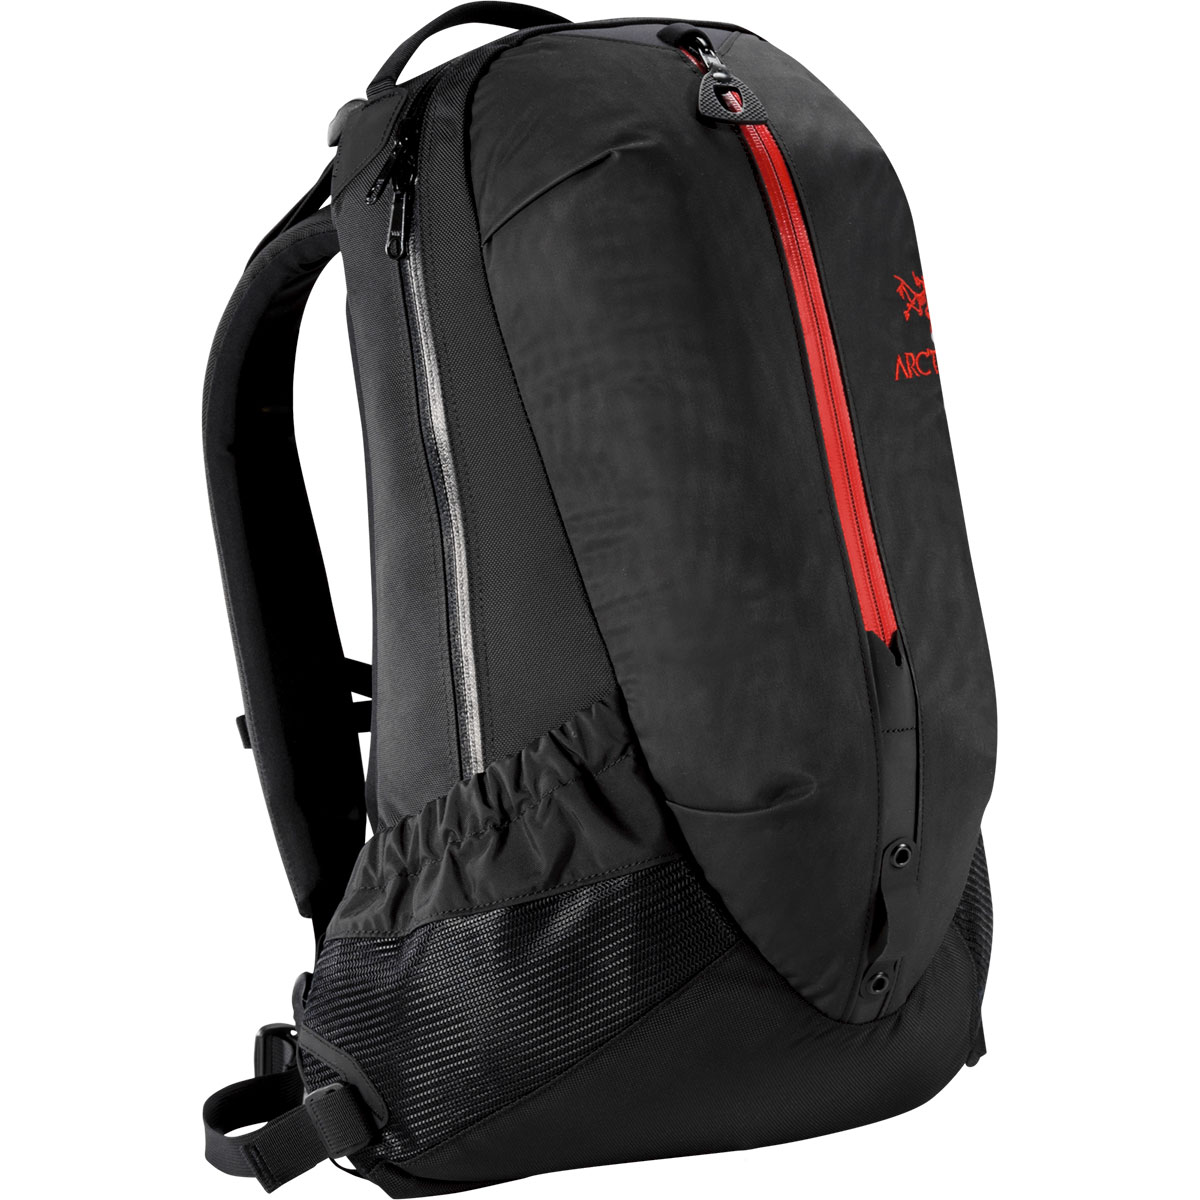 Arc'teryx Arro 22 Backpack, discontinued colors (free ground shipping) :: Daypacks and ...